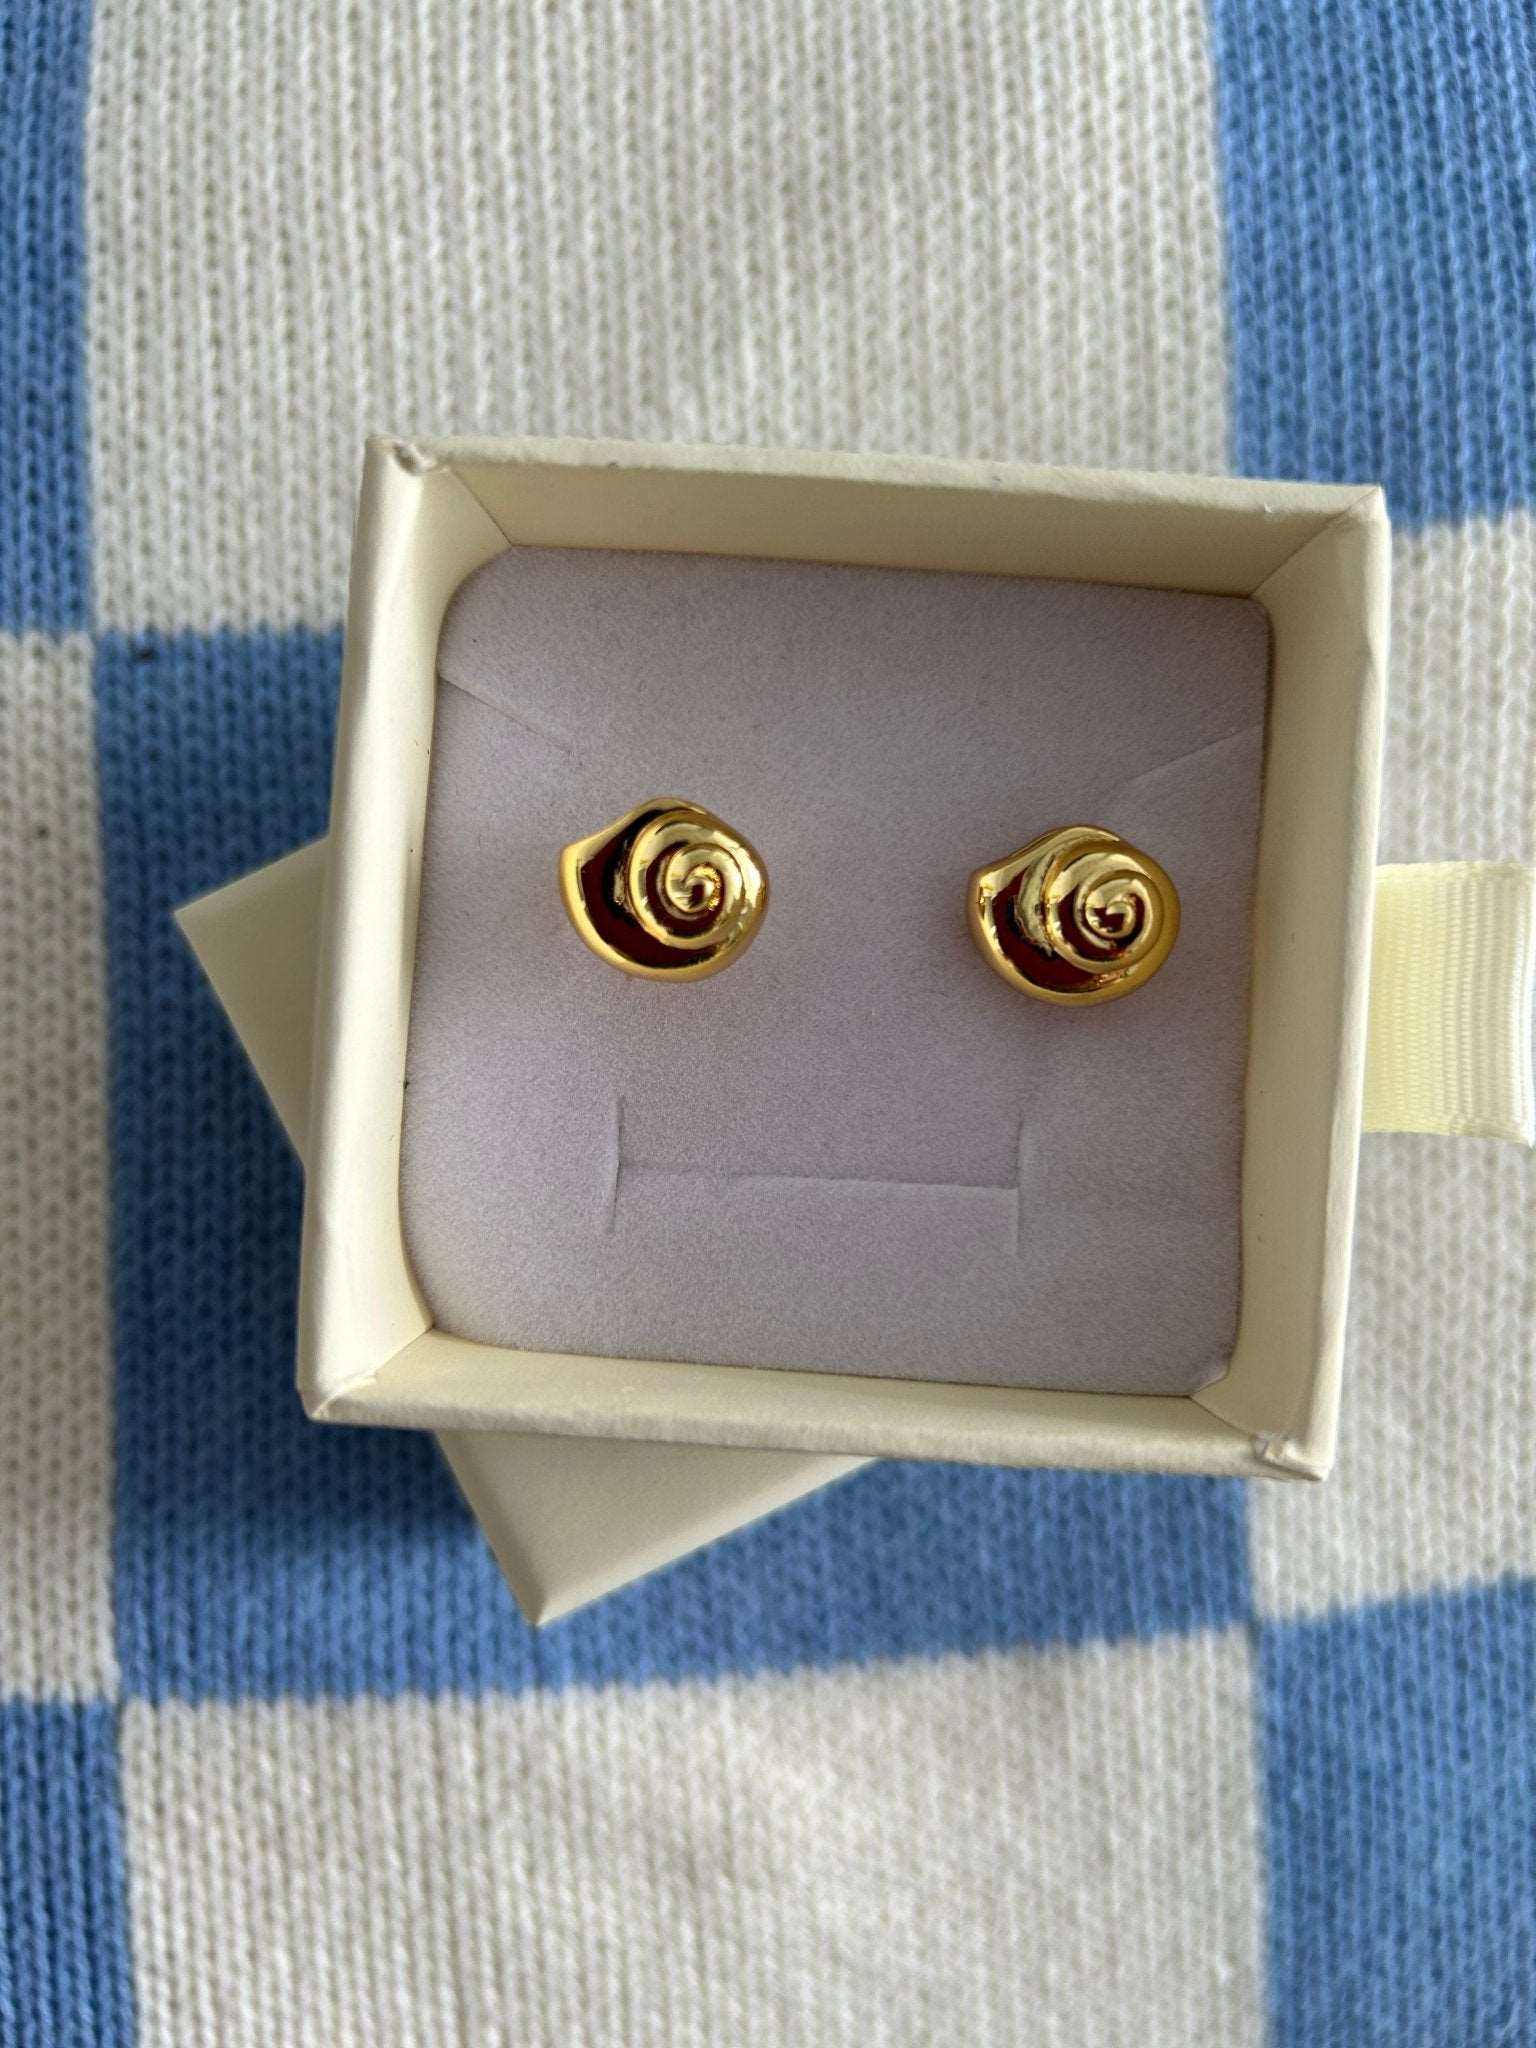 Gold Shell stud earrings in Bixby and Co jewellery box